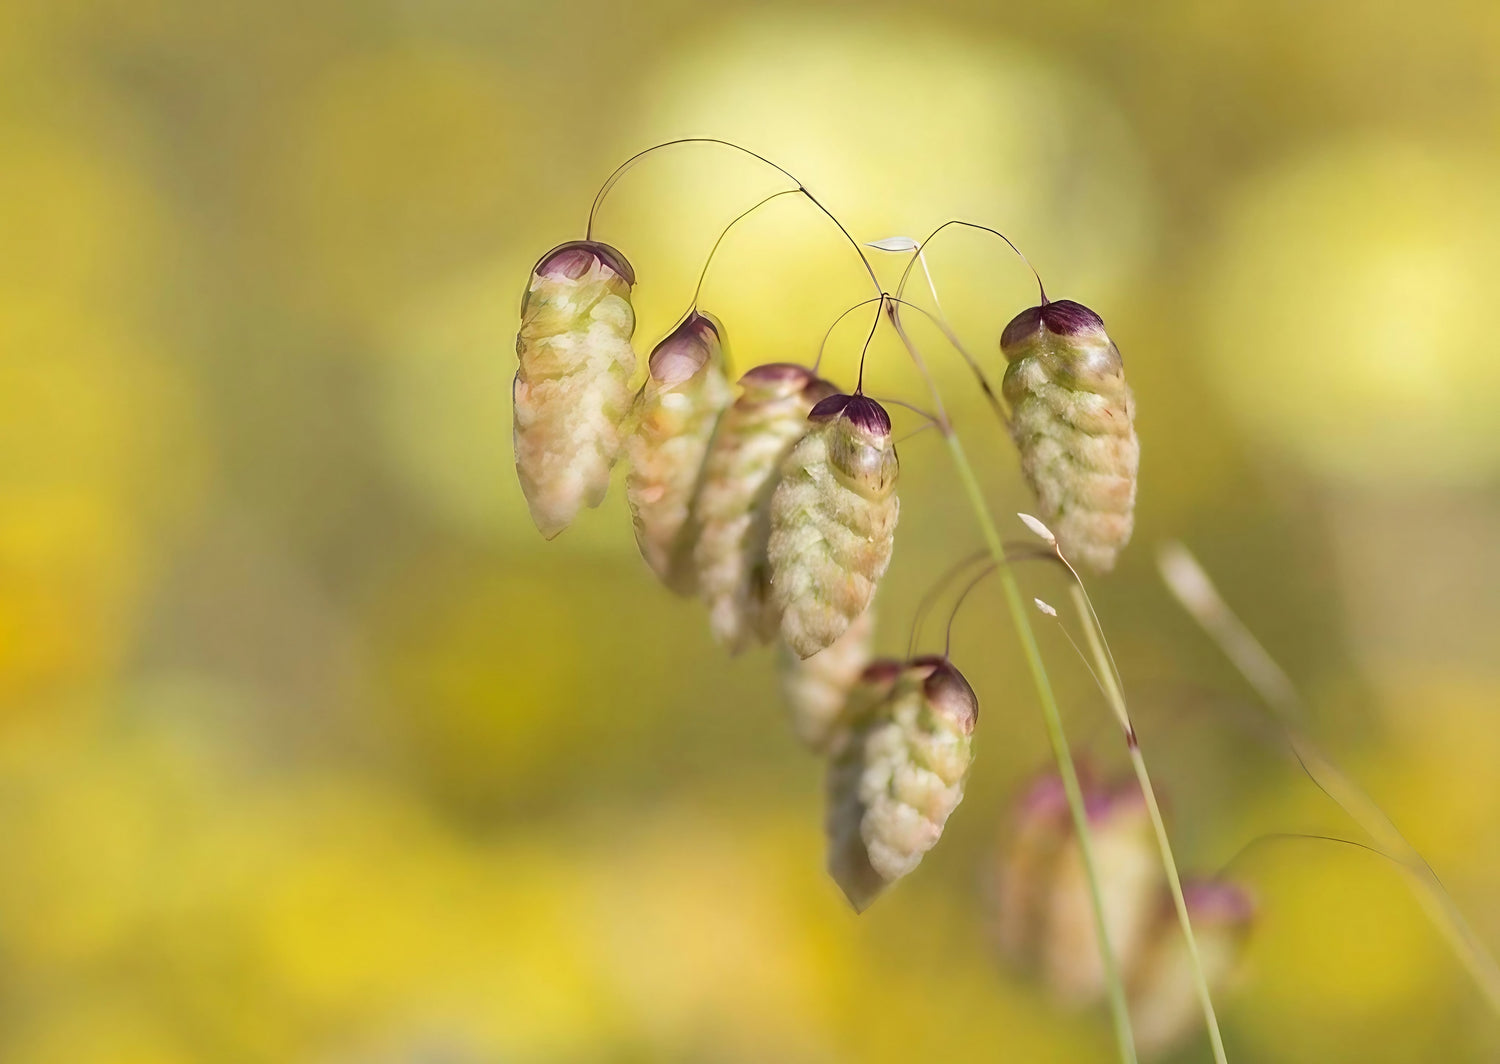 Close-up view of Briza Maxima, also known as Quaking Grass, with its distinctive seed heads